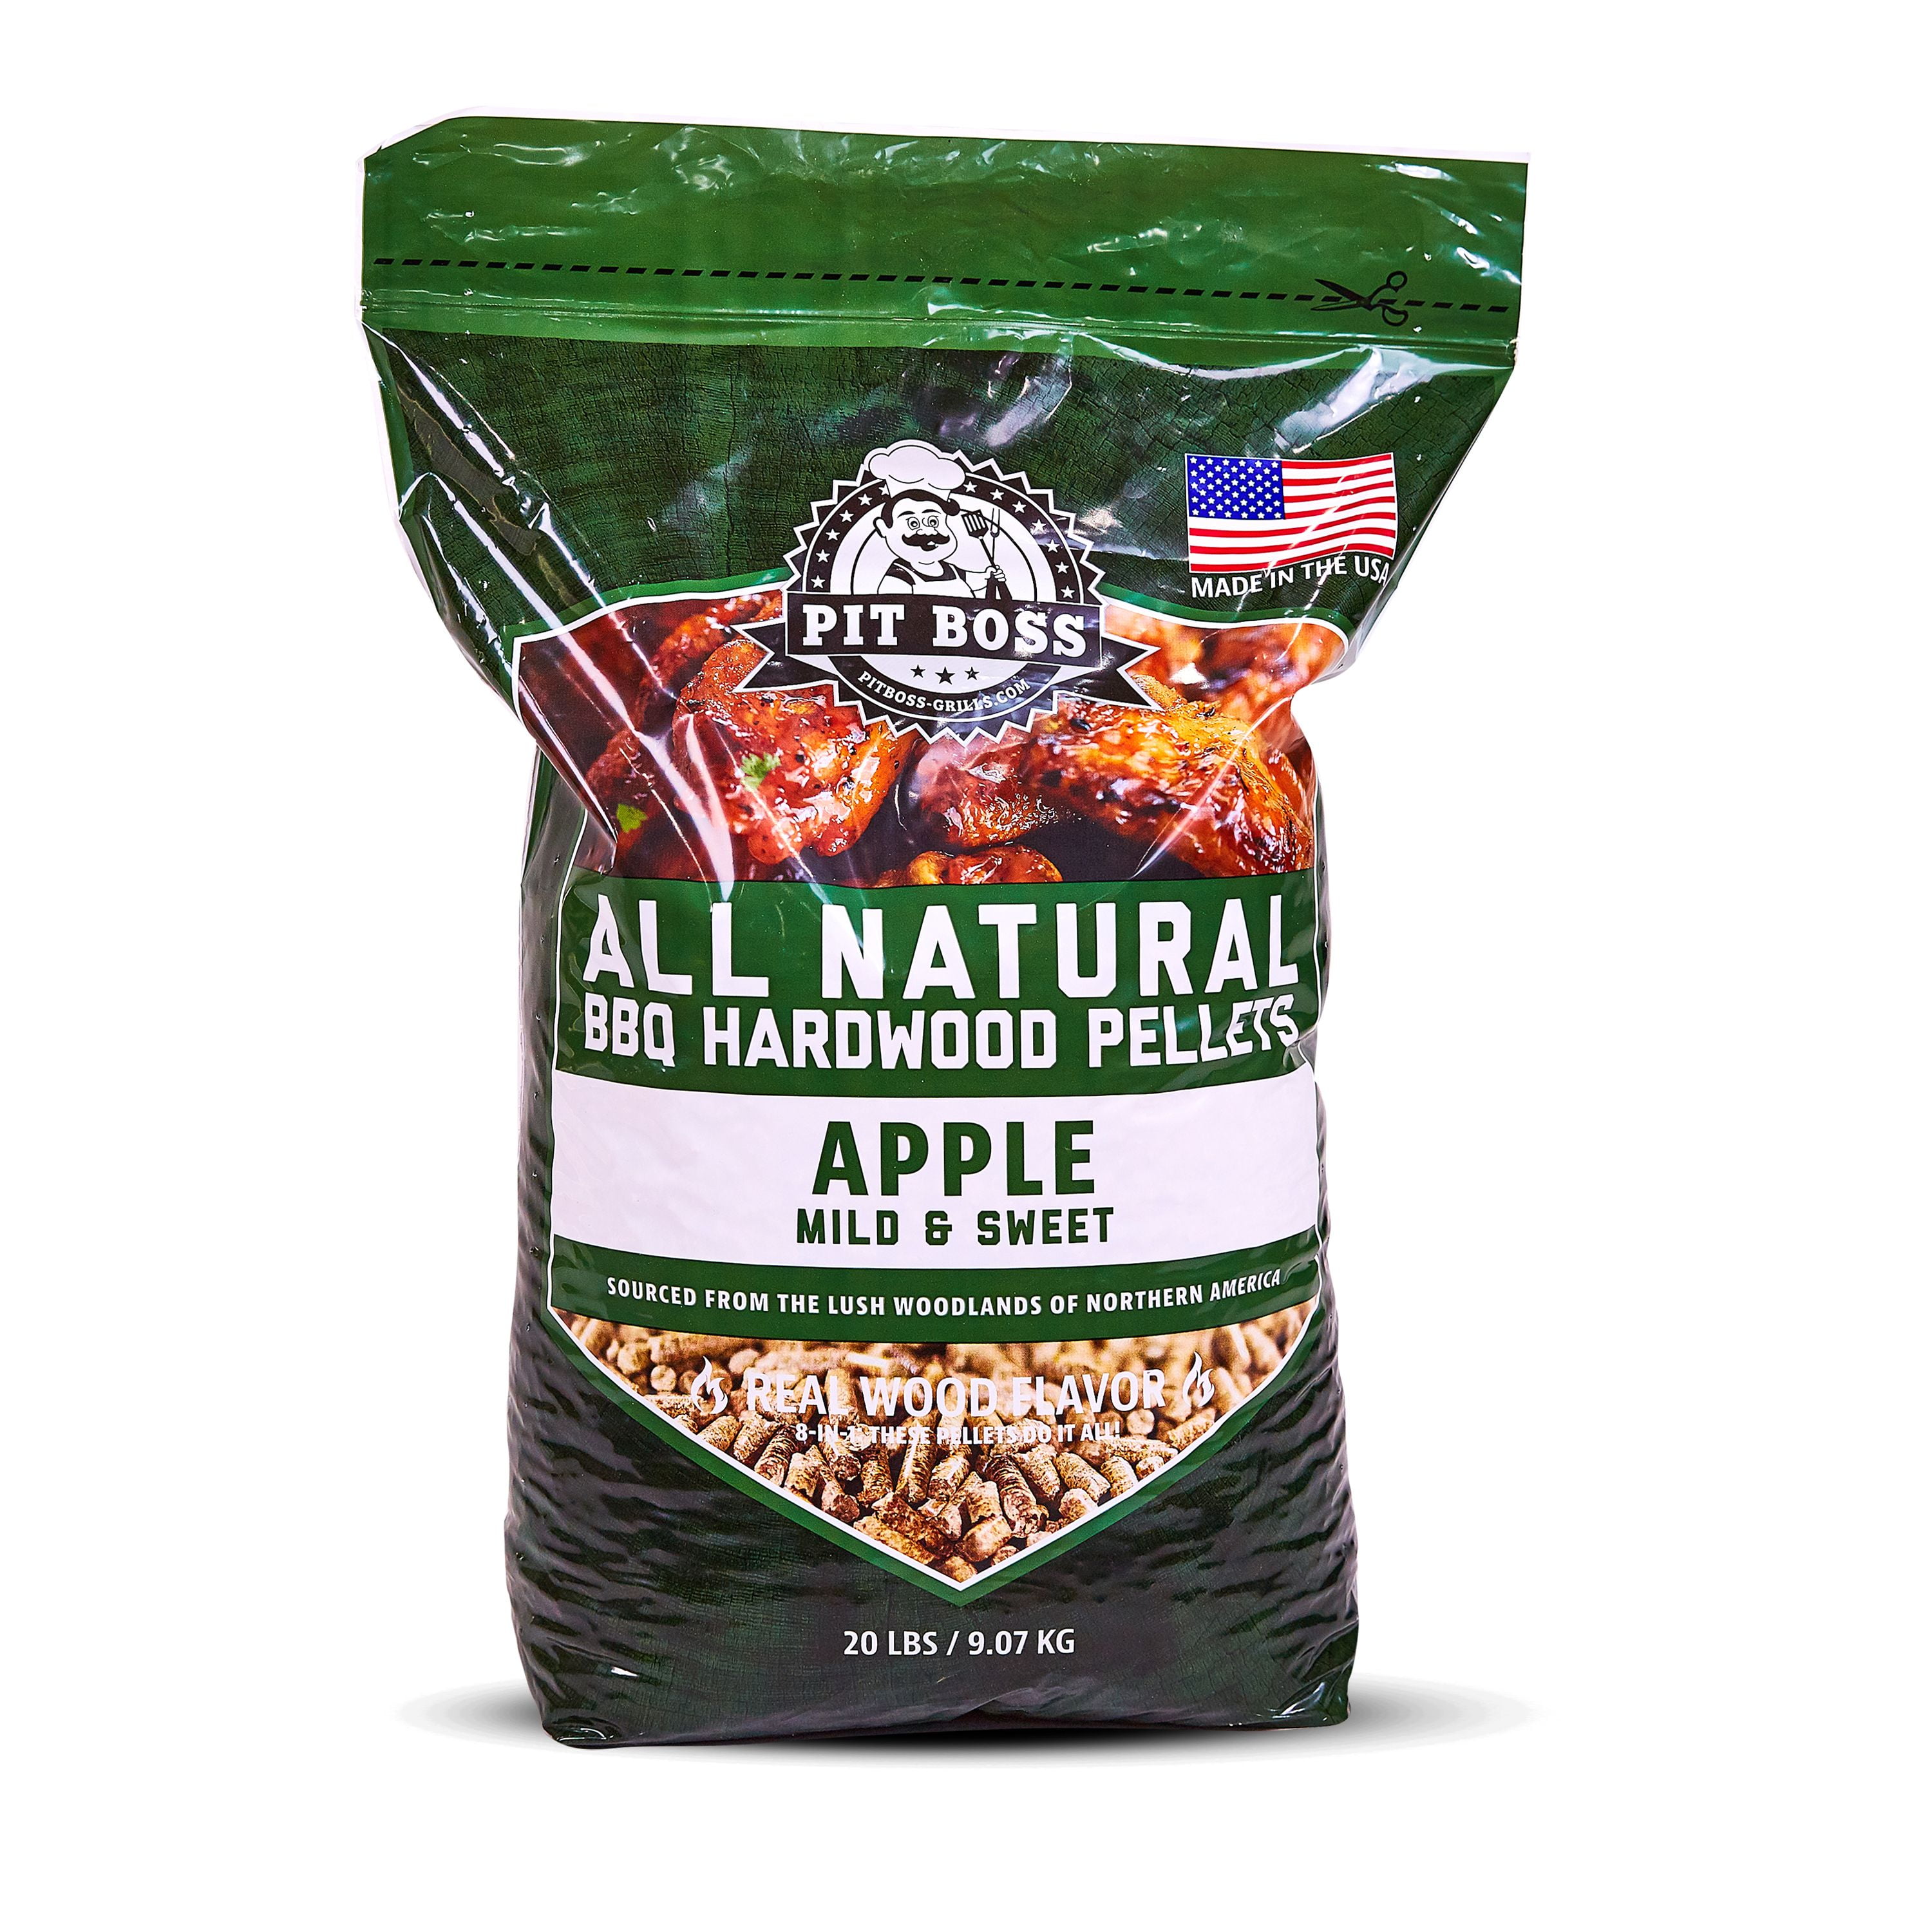 Hardwood Pellets England Wood Smoker Grilling BBQ Grill Cooking 40 lb Natural